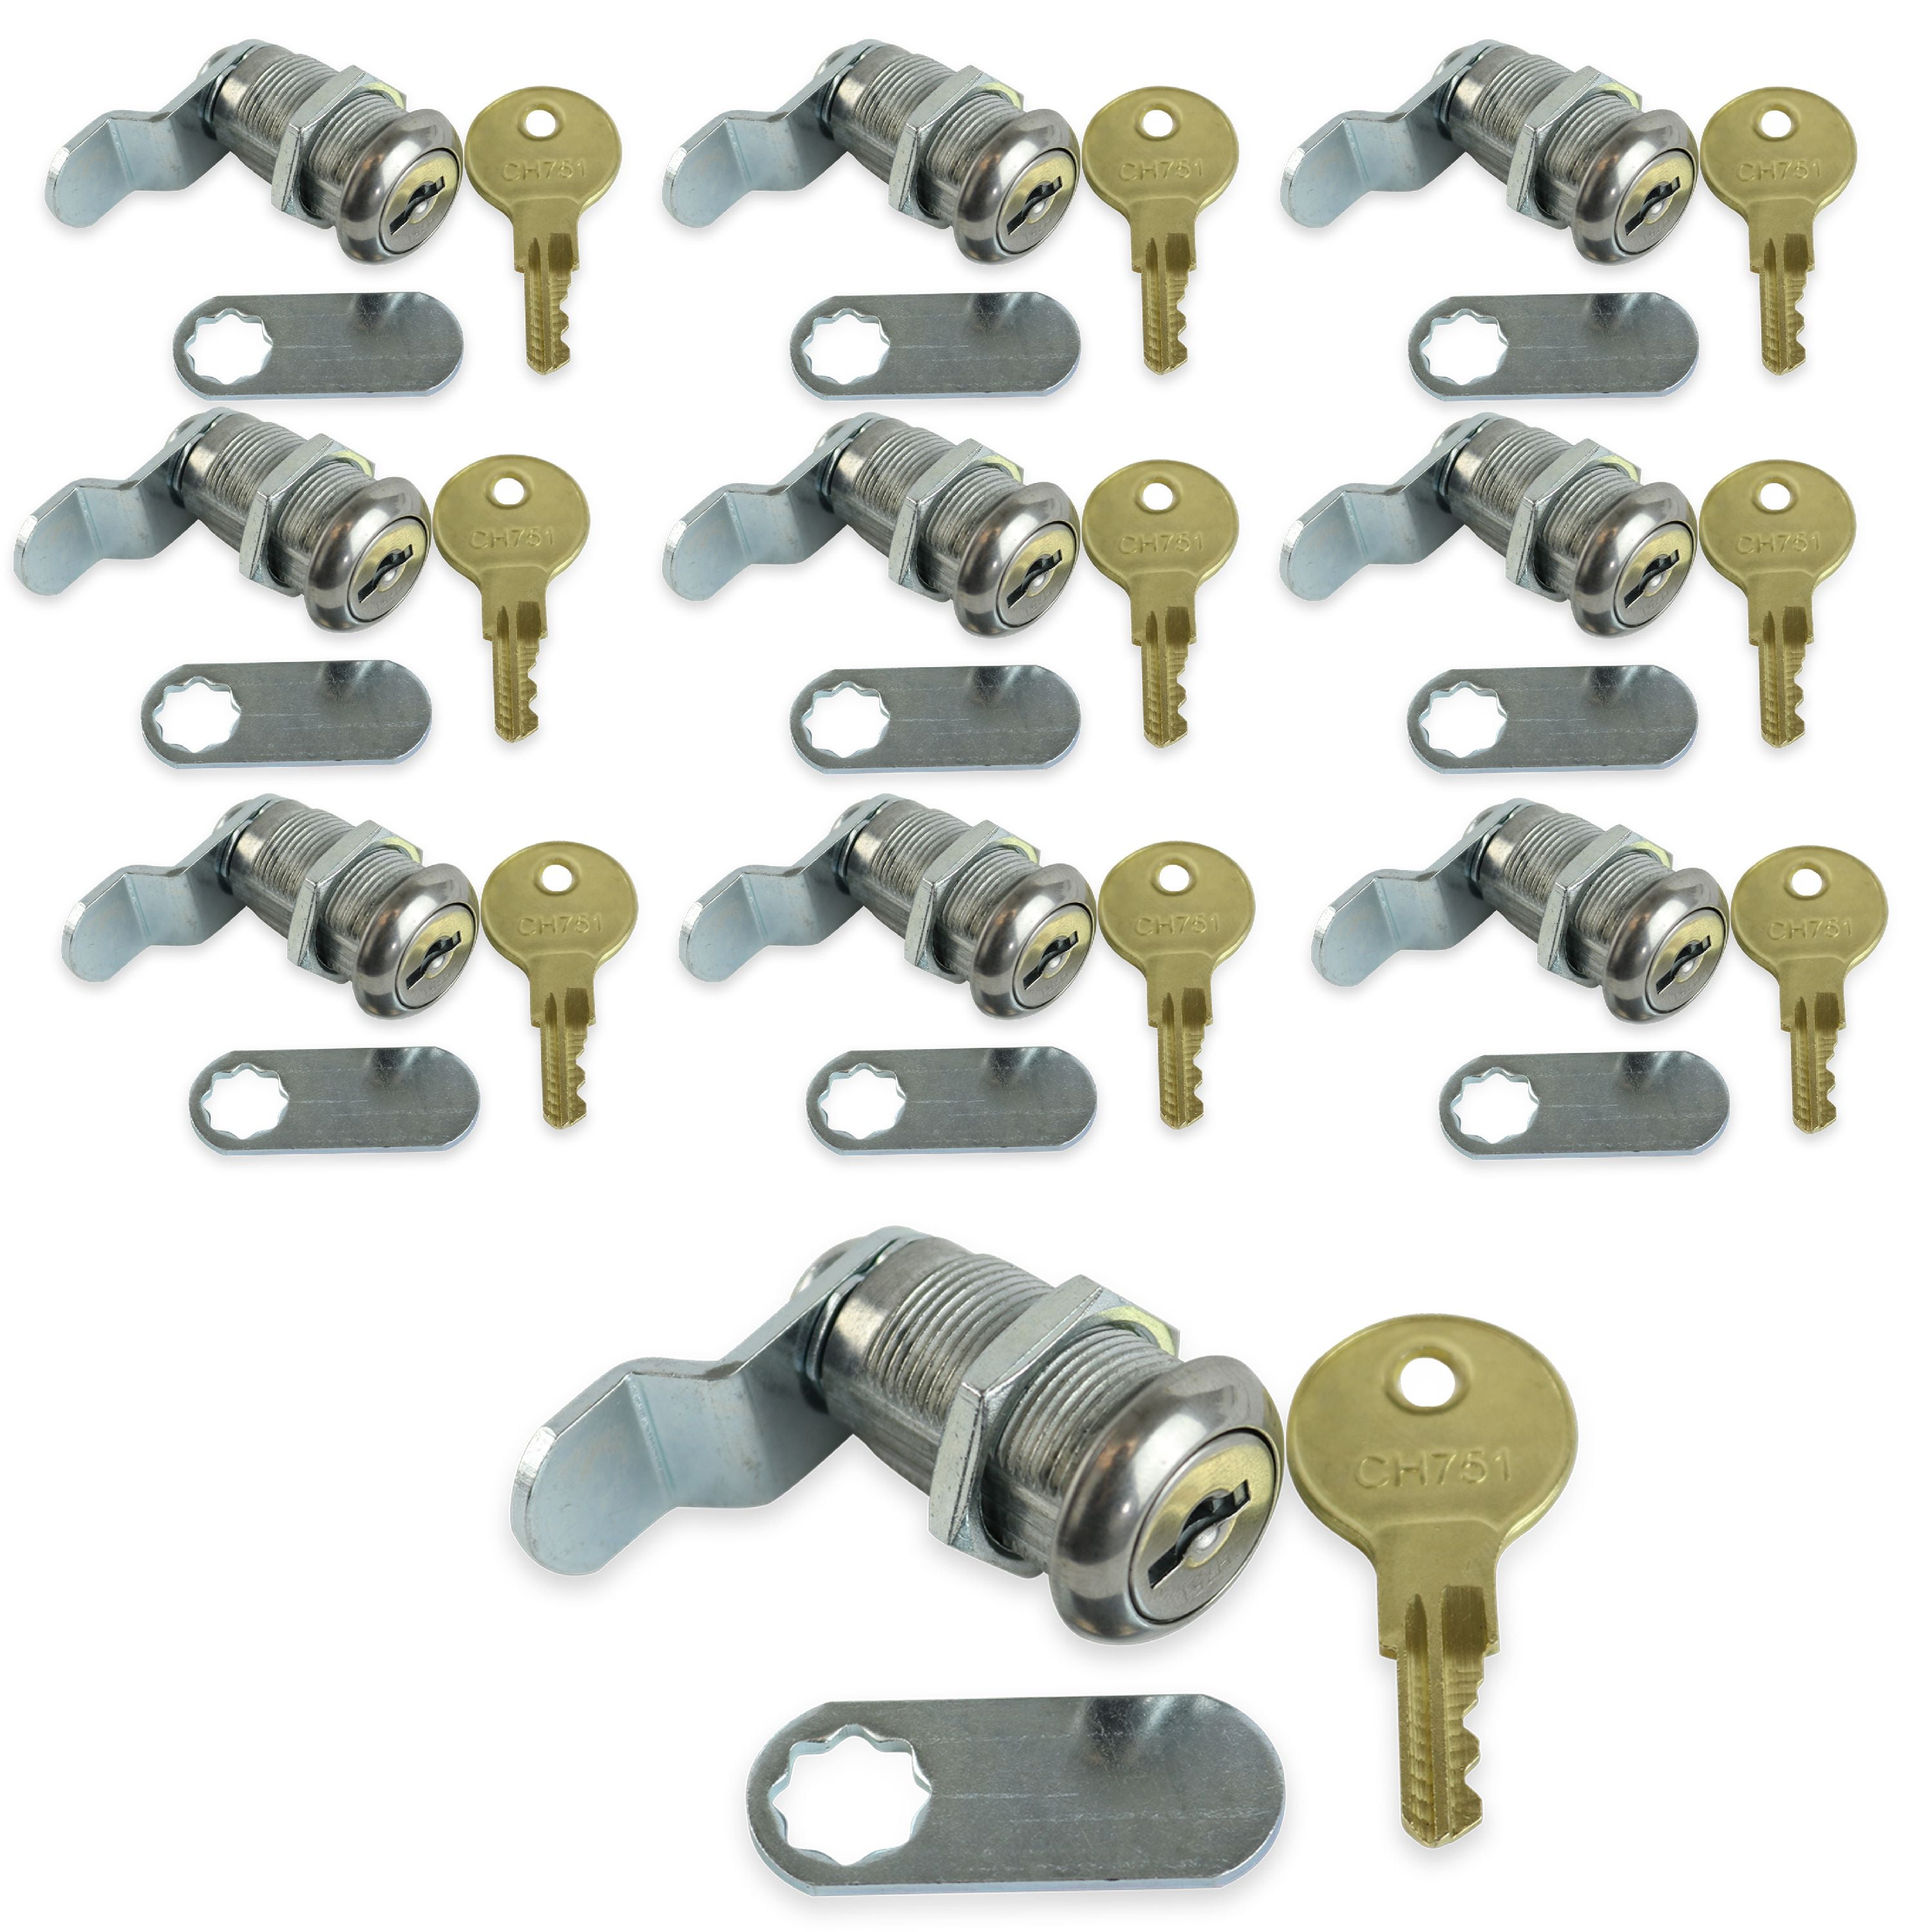 Details about   4 Pack RV Leisure CW 7/8" Standard Key Compartment Door Cam Locks for RV 